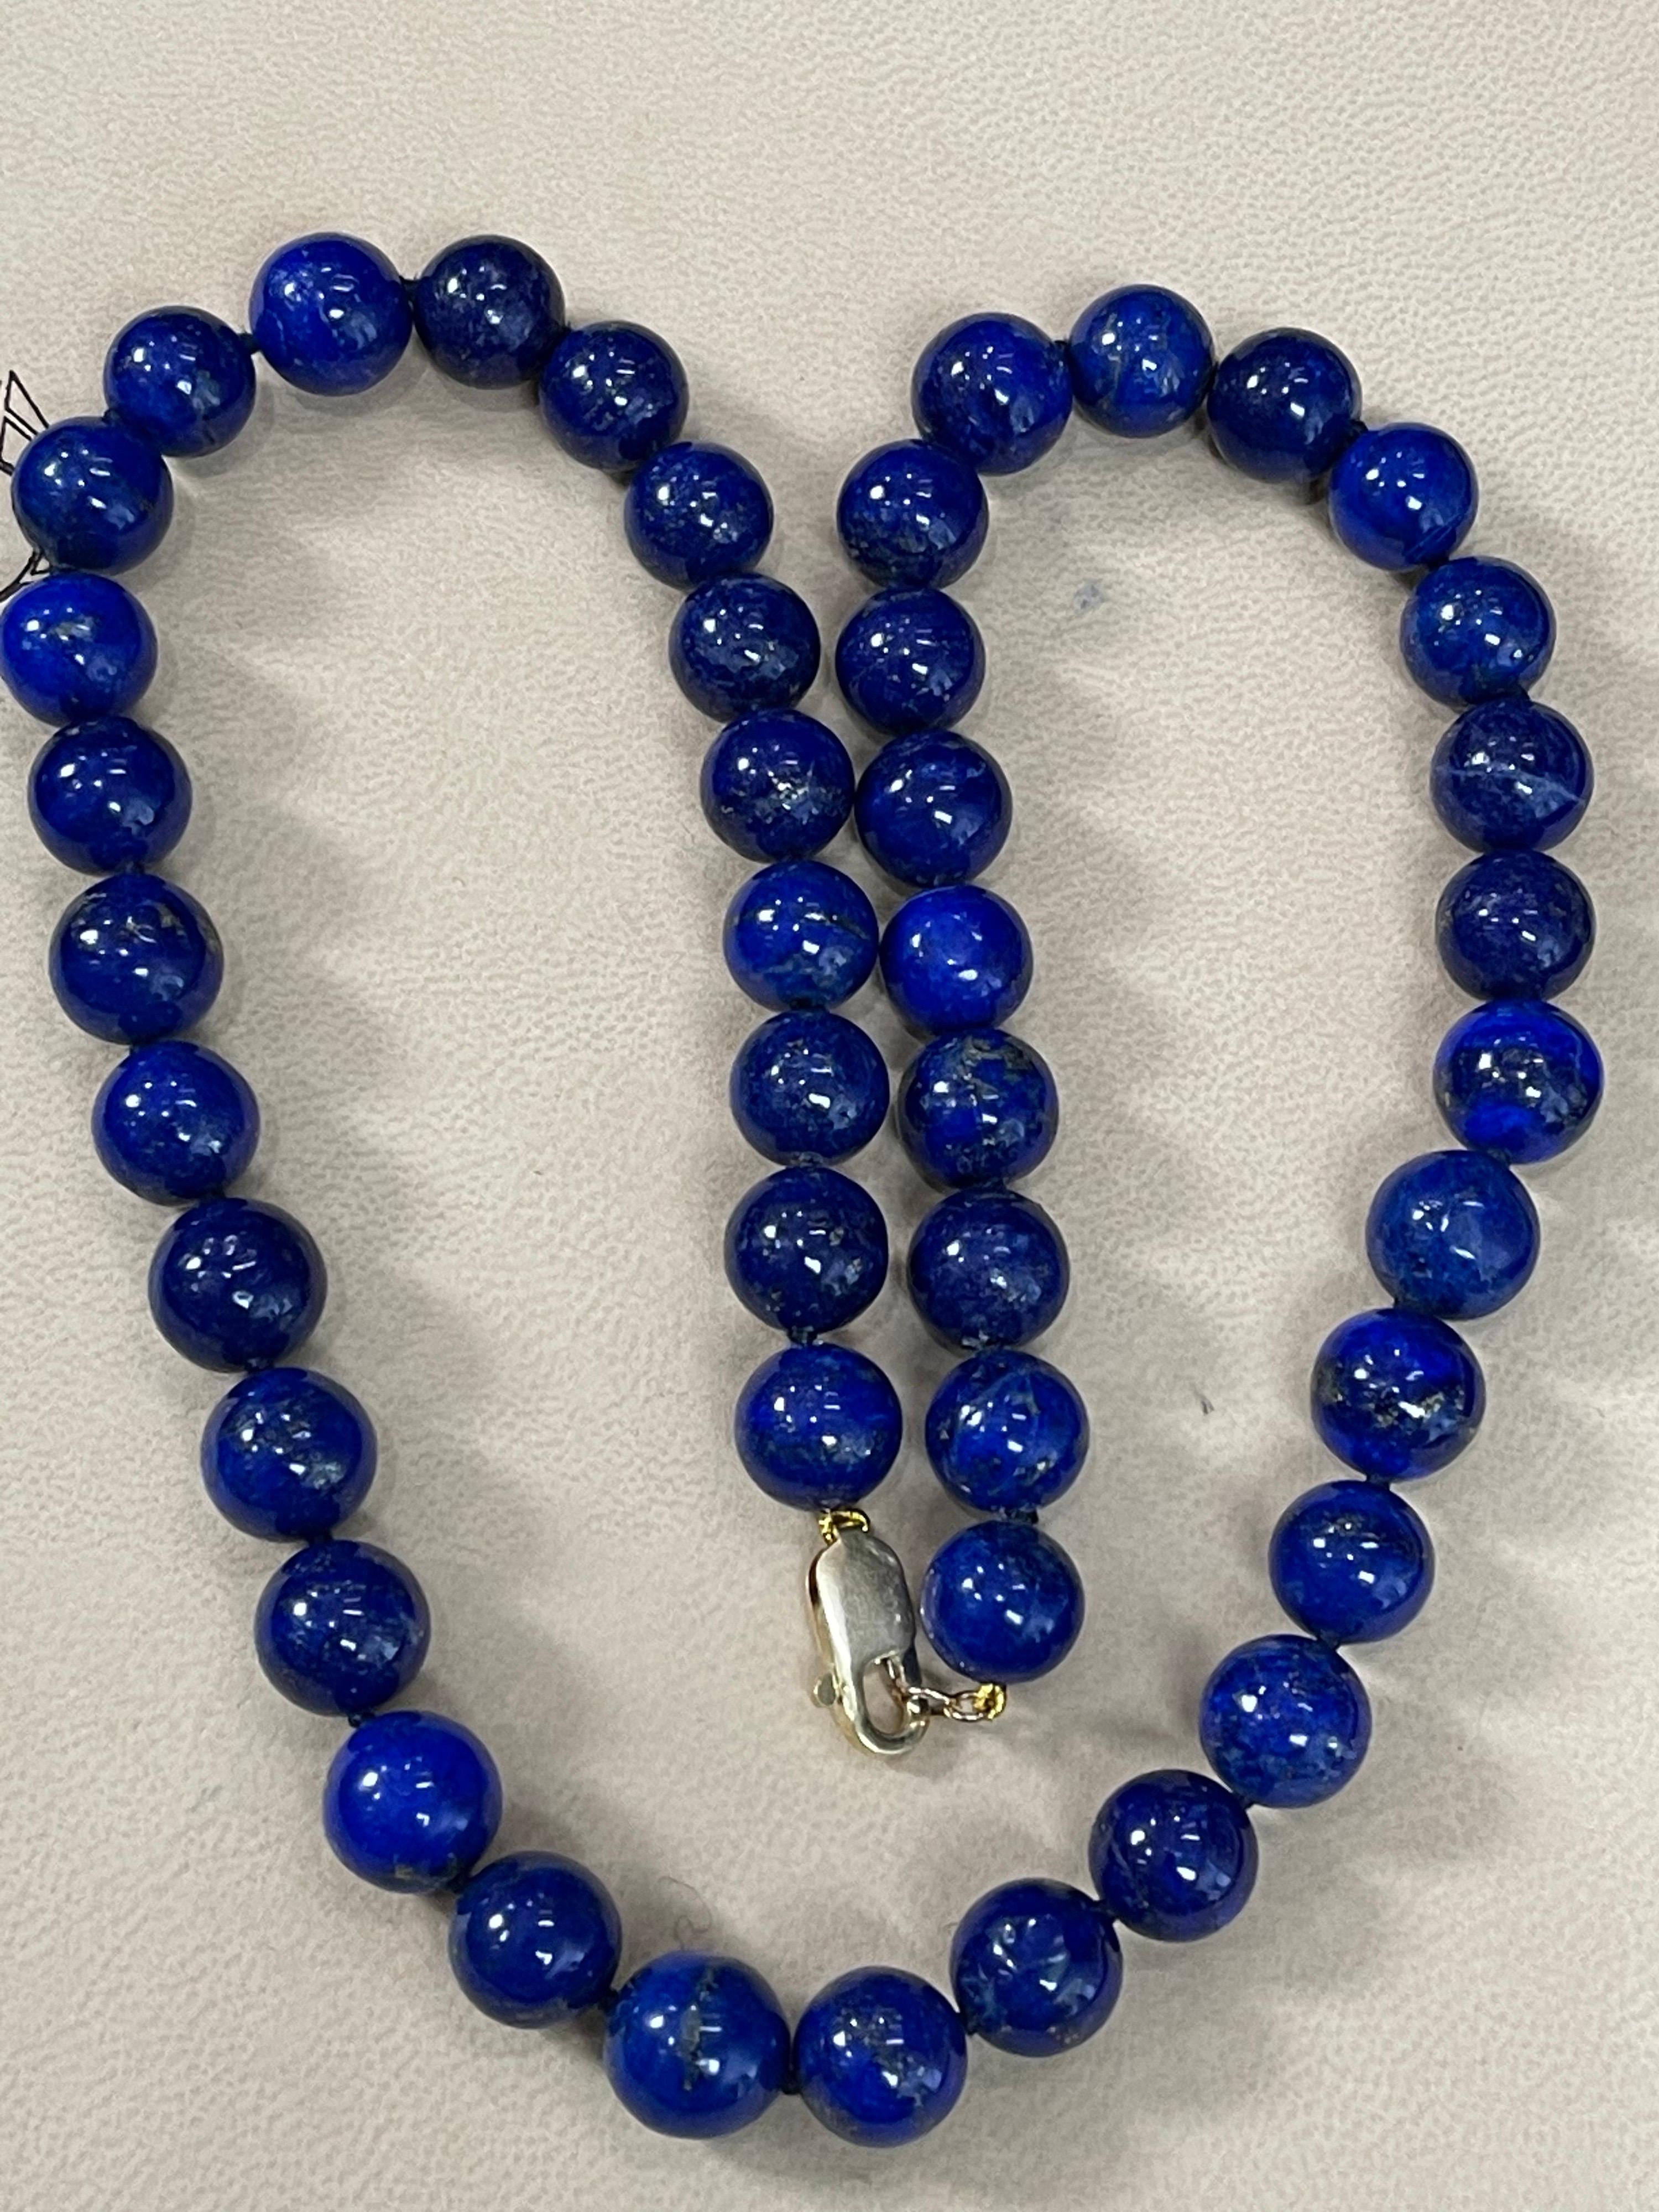 Vintage Lapis Lazuli Single Strand Necklace with 14 Karat Yellow Gold Lobster For Sale 9